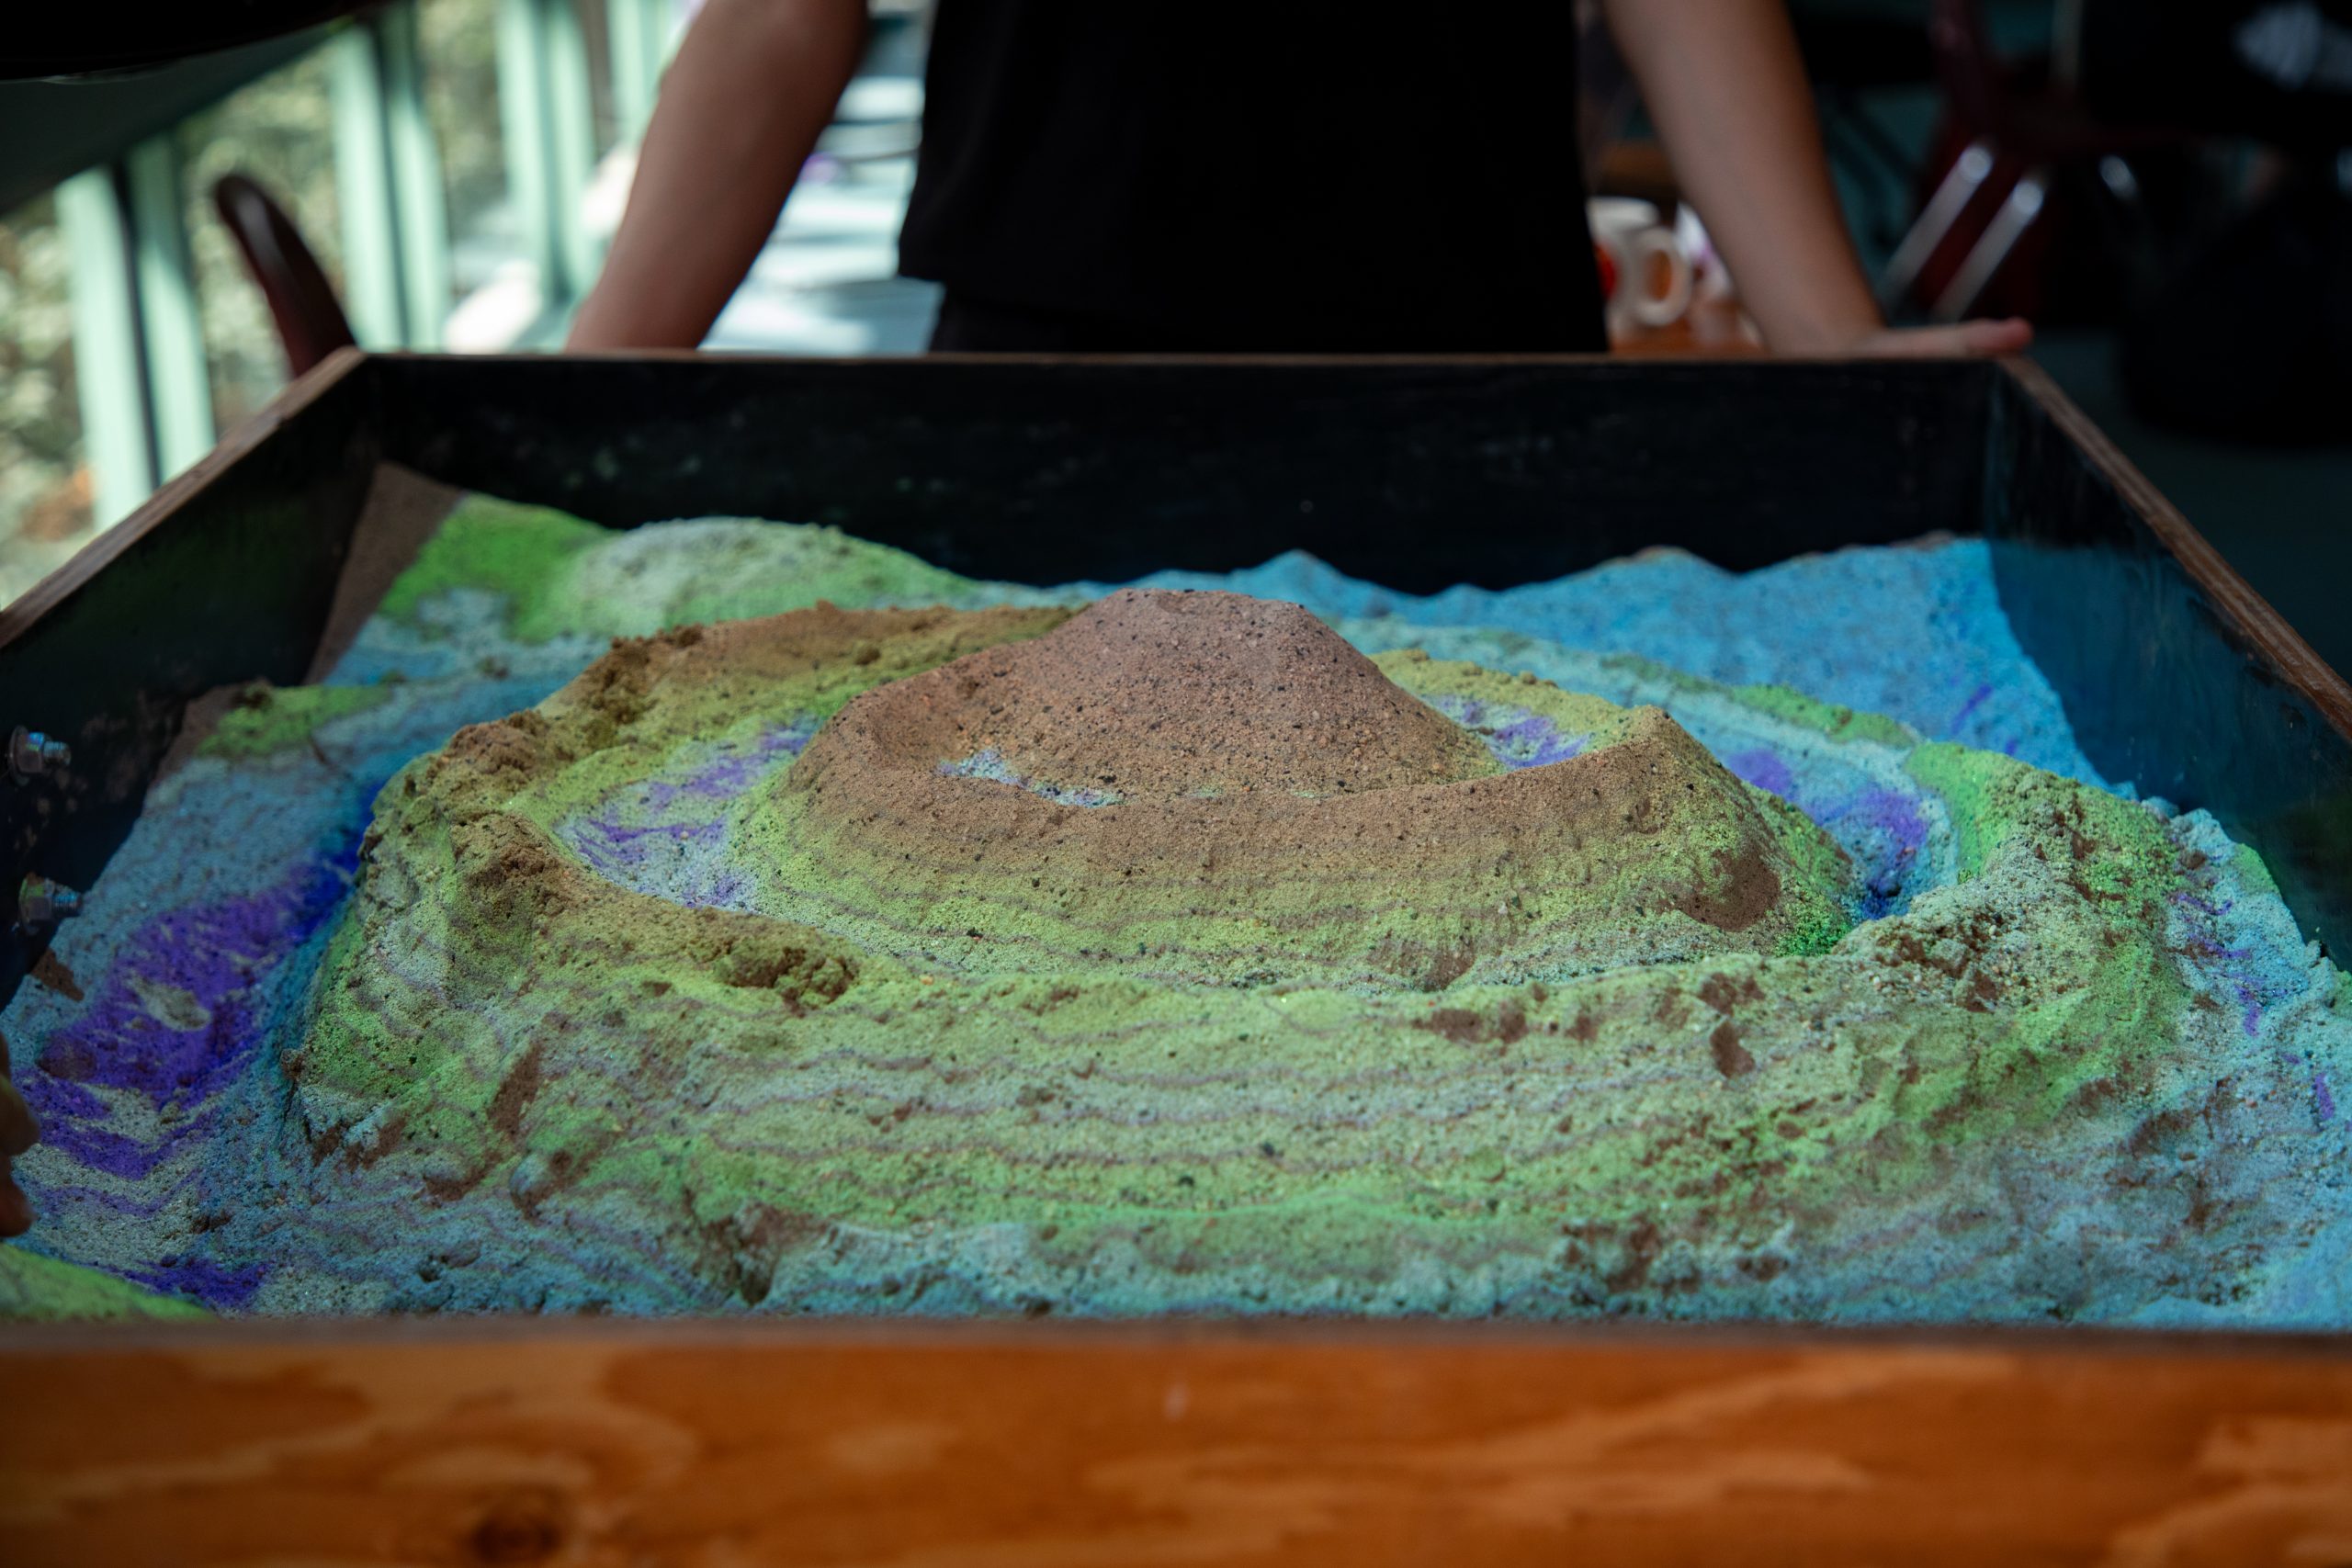 Topographical map projected over sand.